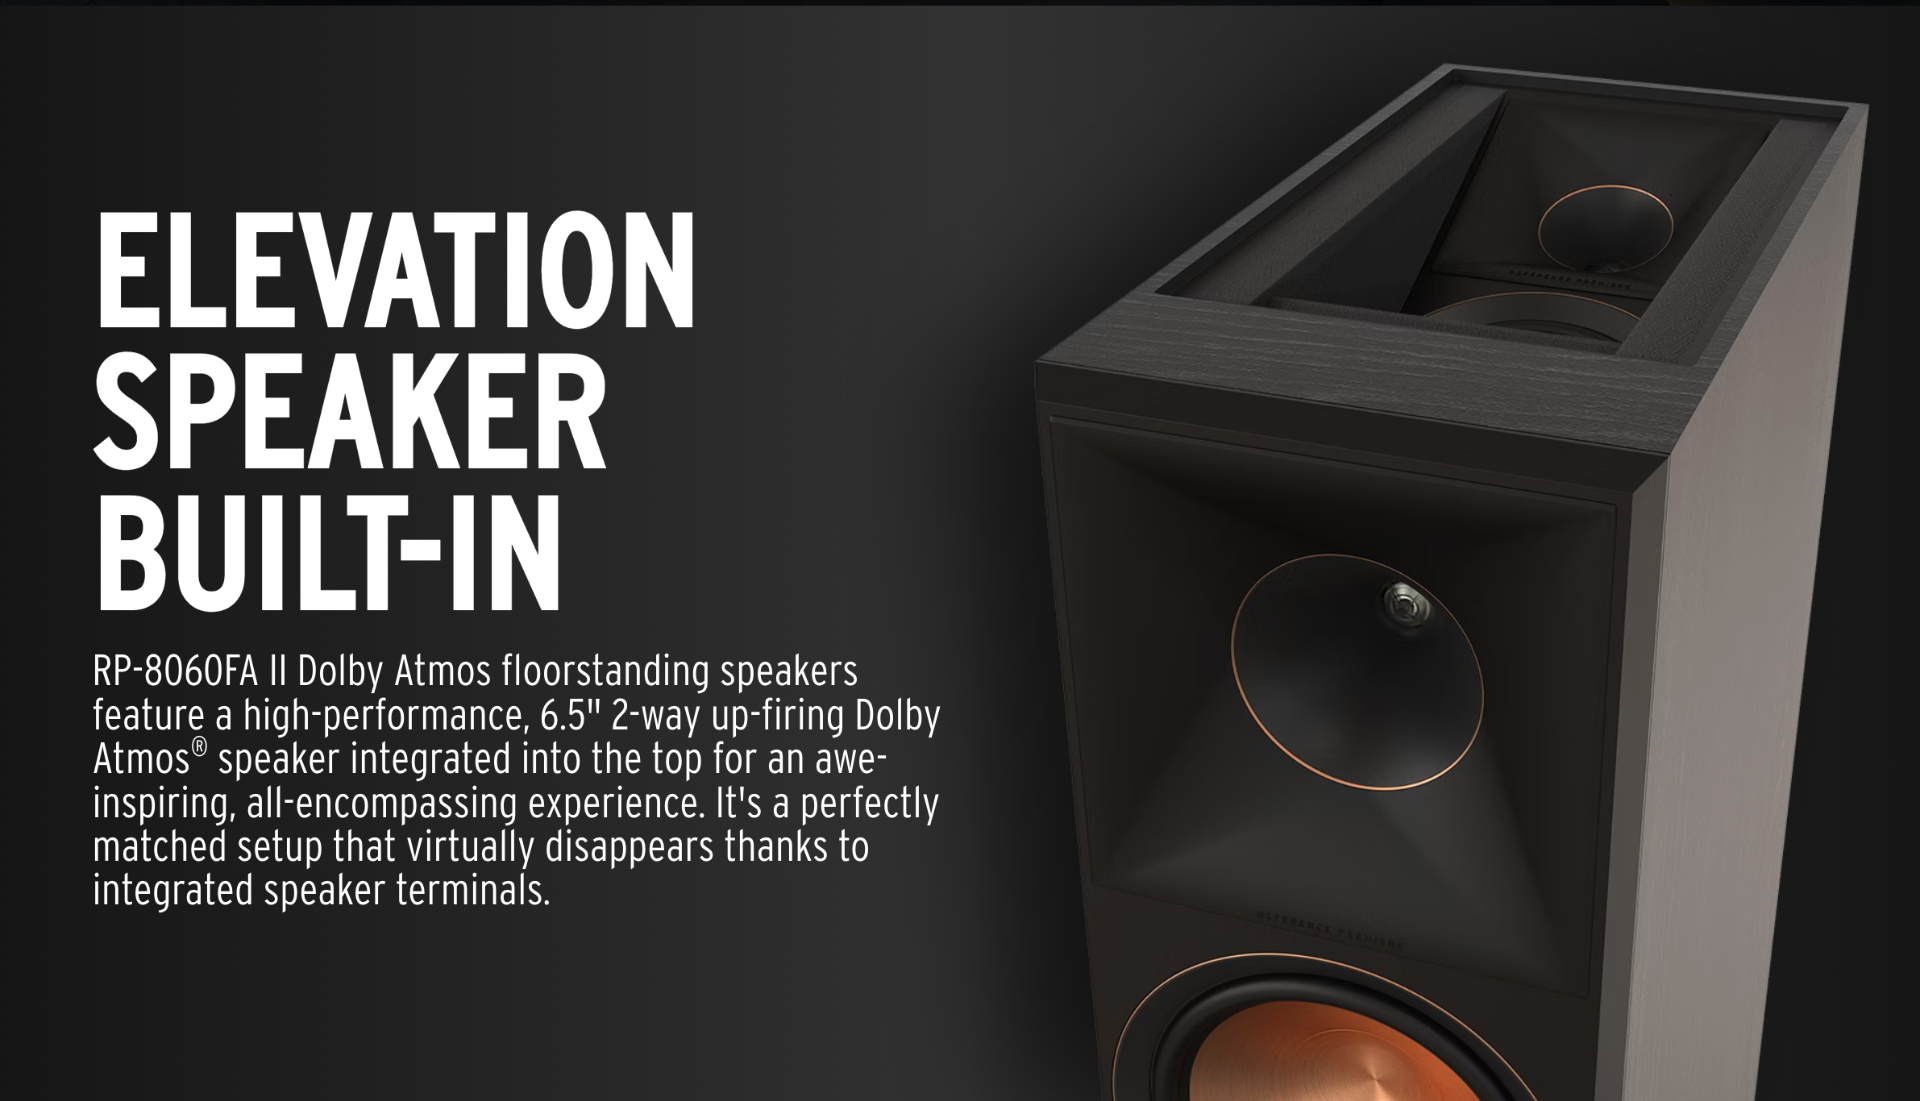 RP-8060FA II Dolby Atmos floorstanding speakers feature a high-performance, 6.5